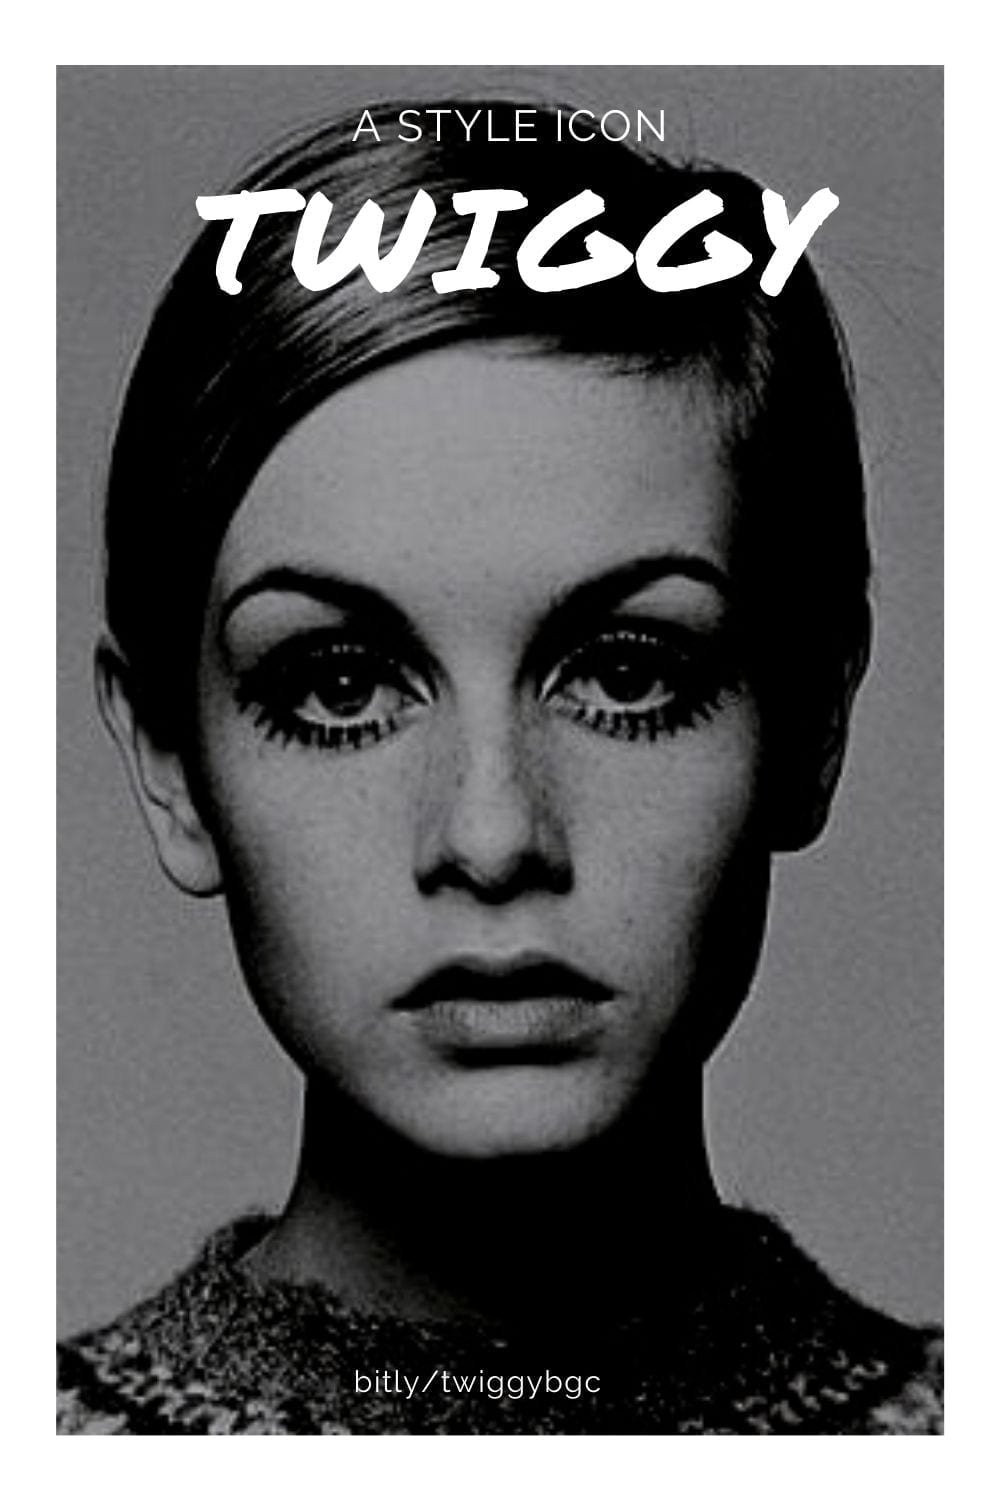 Twiggy - the London girl, style icon and fashion legend.